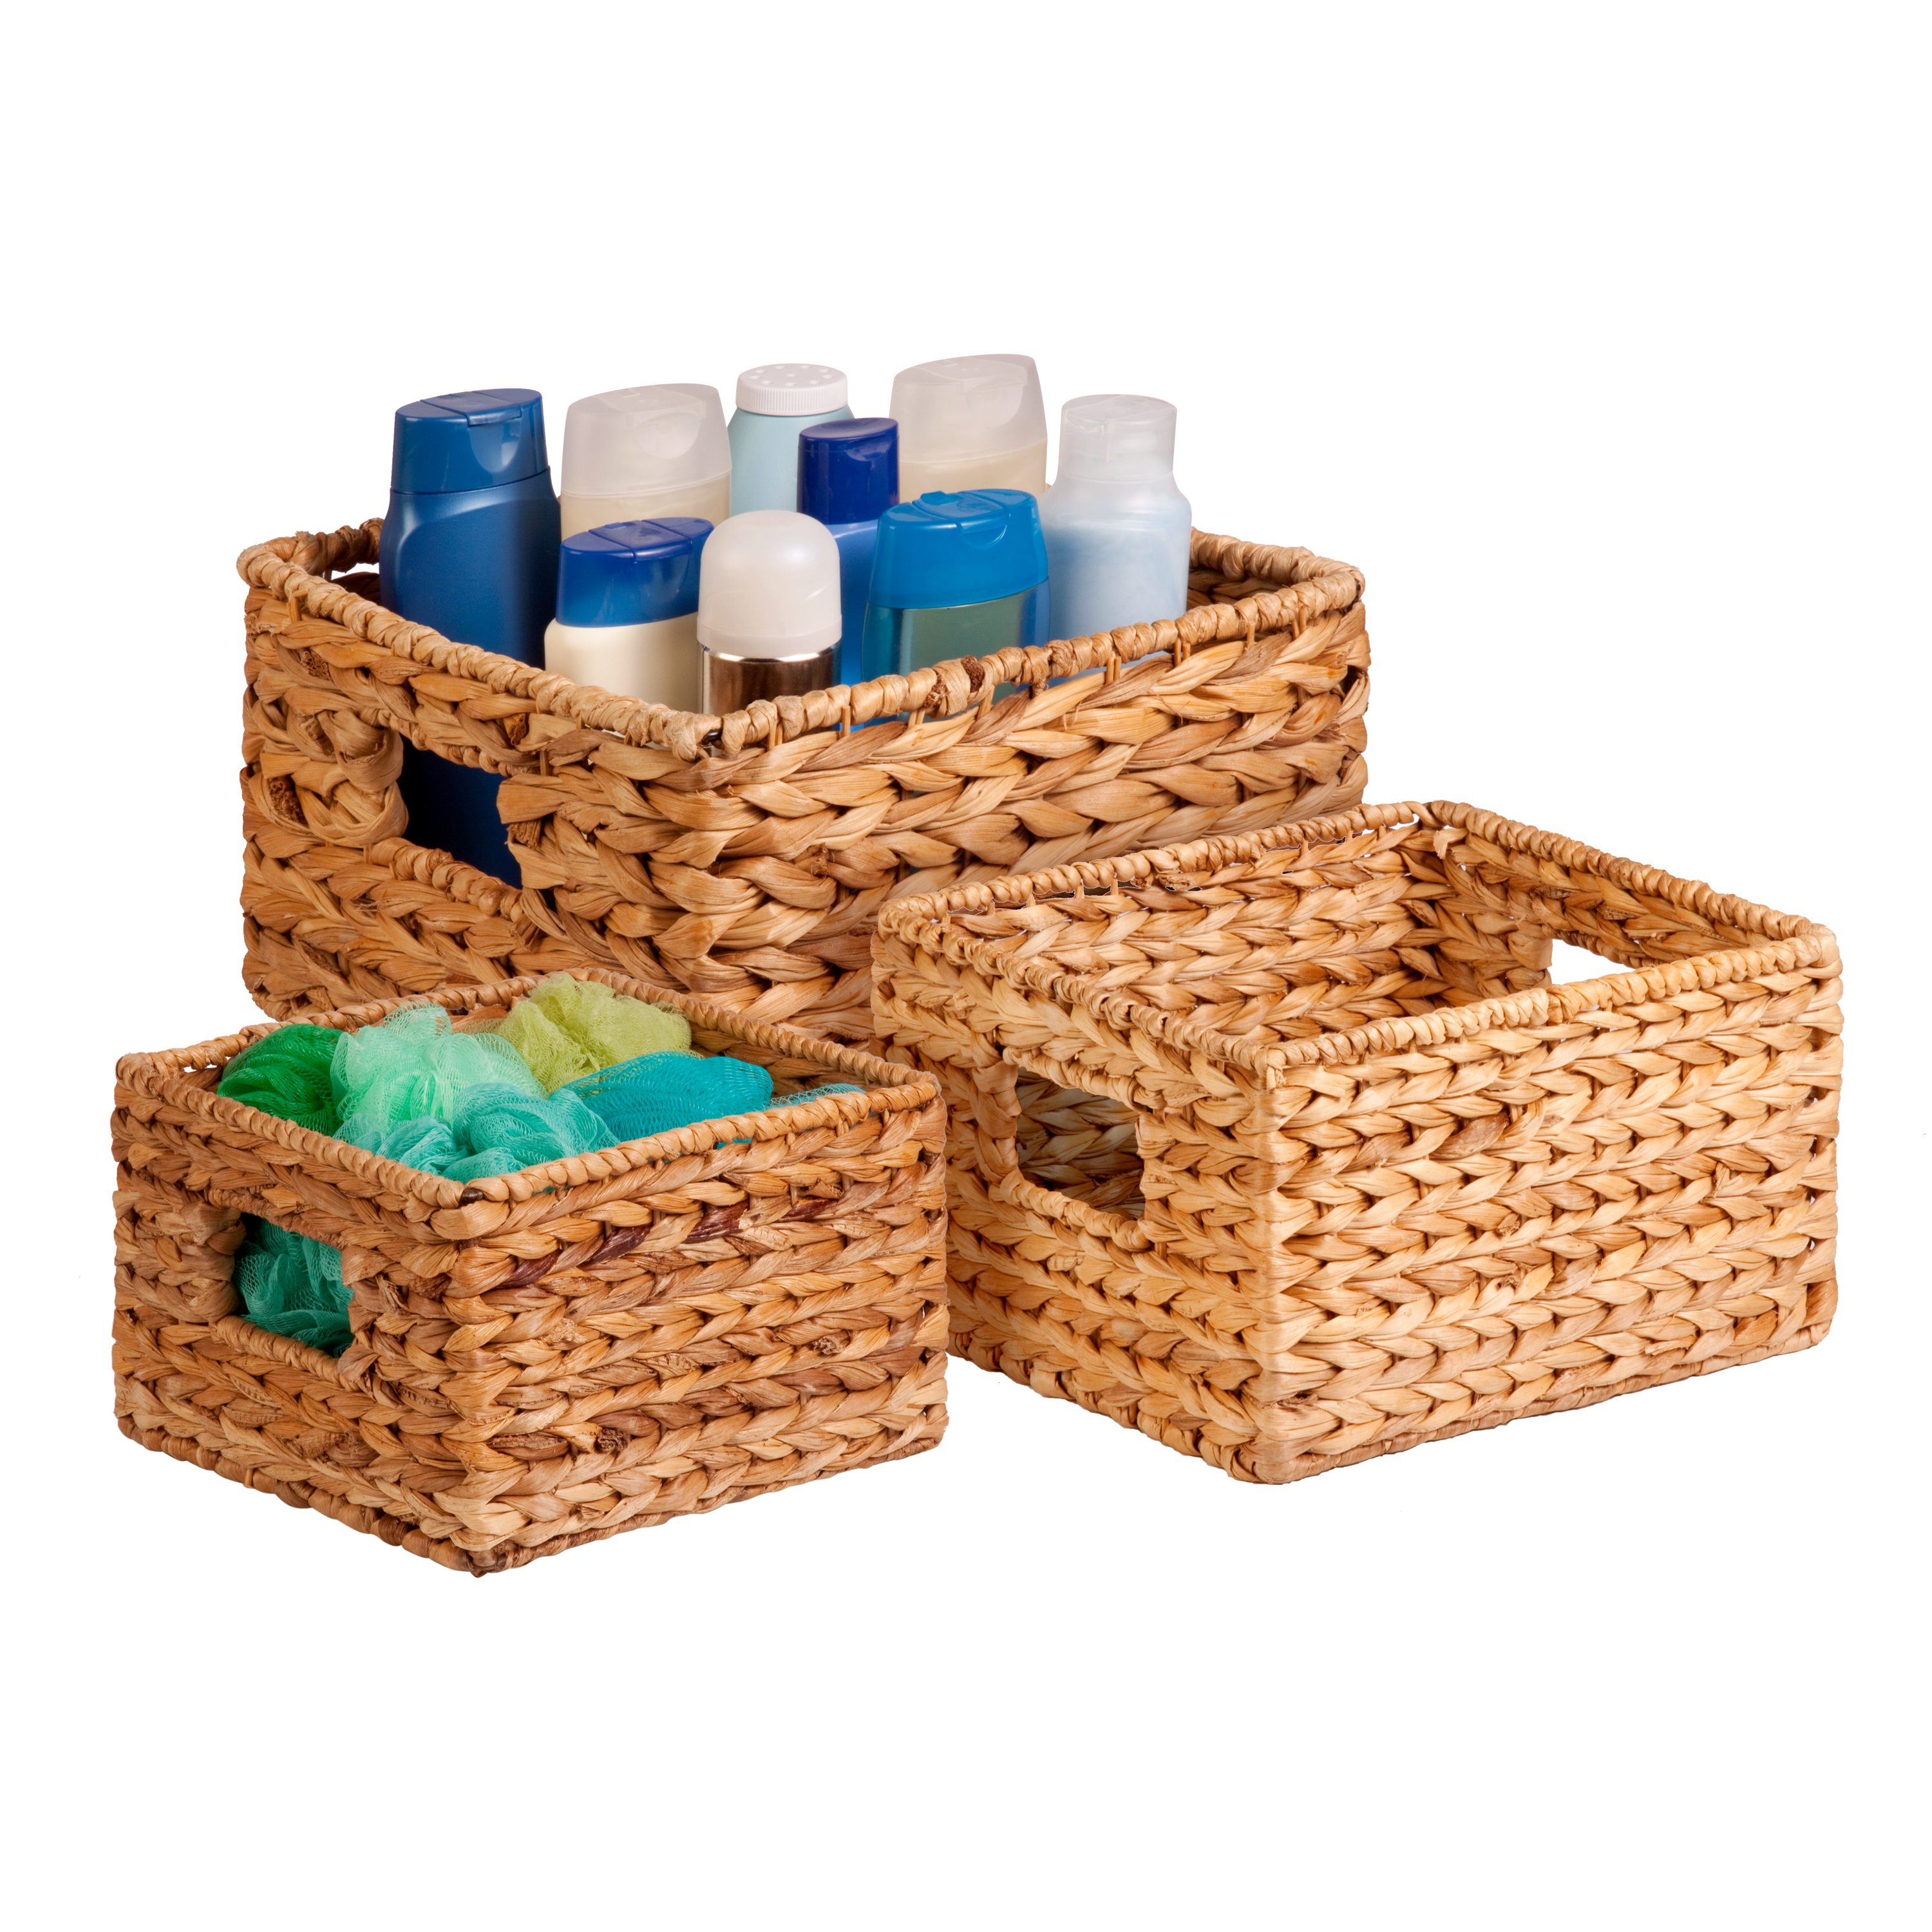 Honey-Can-Do Set of 3 Wicker Storage Nesting Baskets with Handles - image 3 of 5